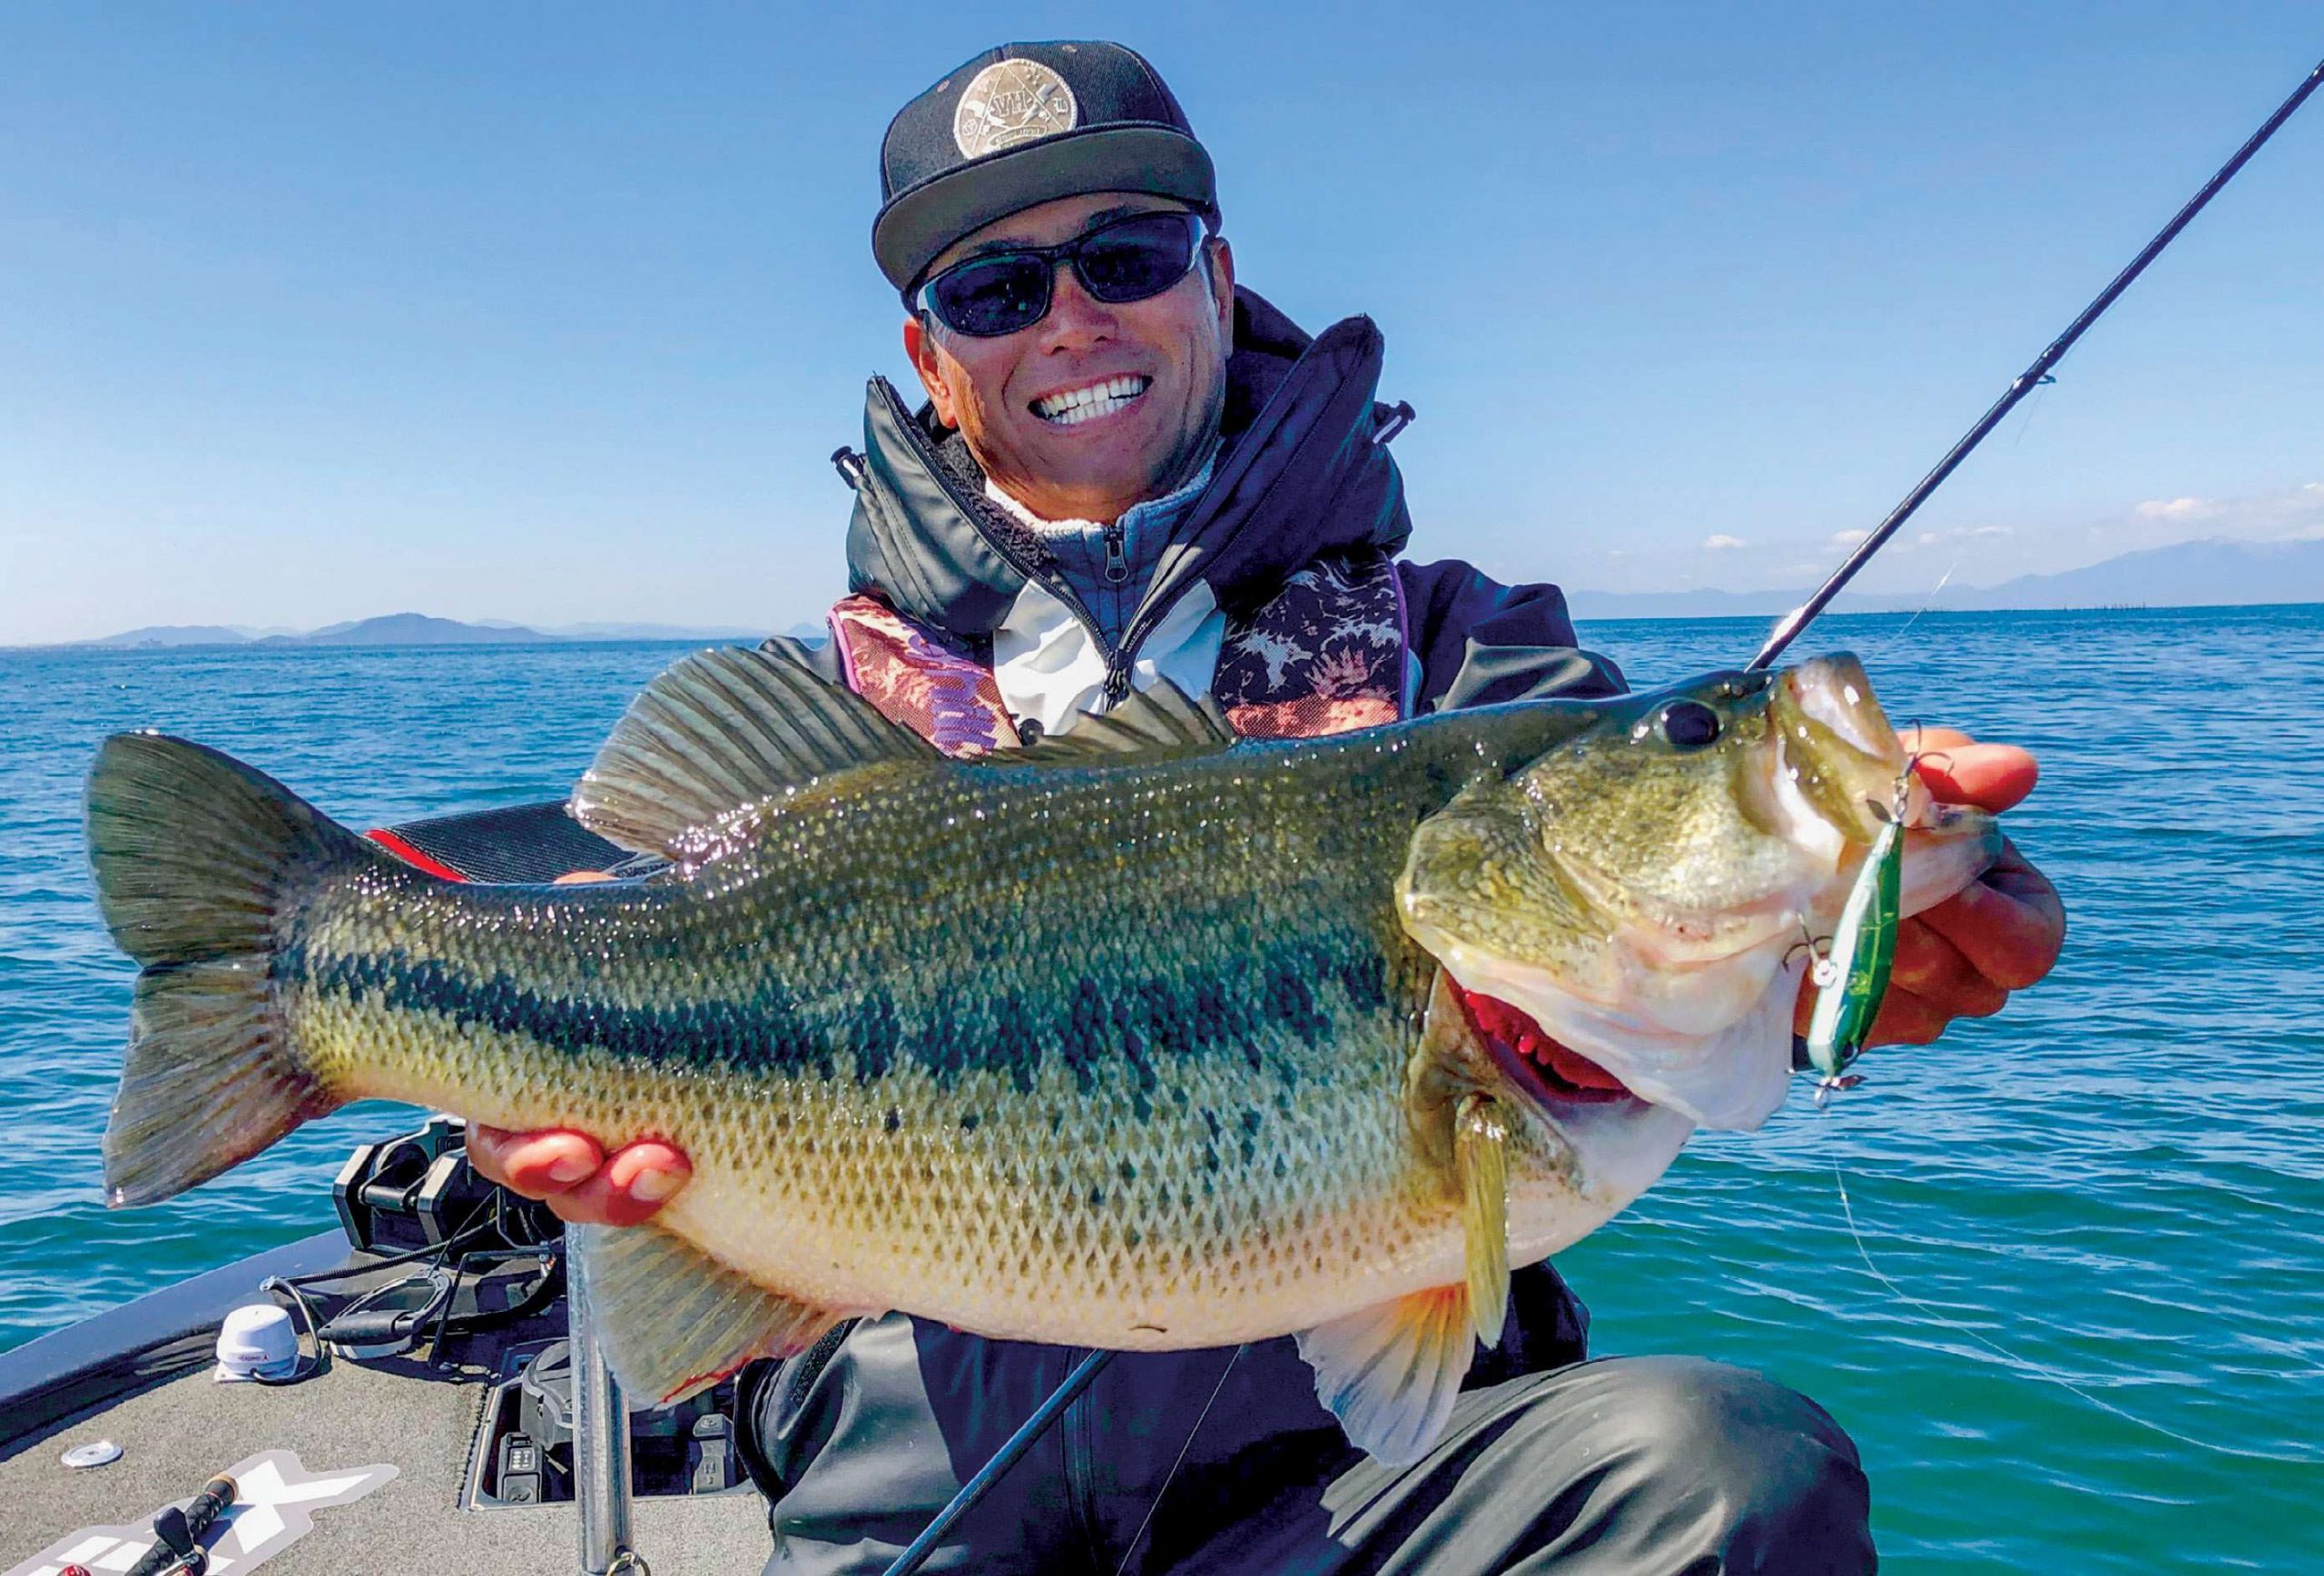 Should your fishing lures have prominent eyes? The experts weigh